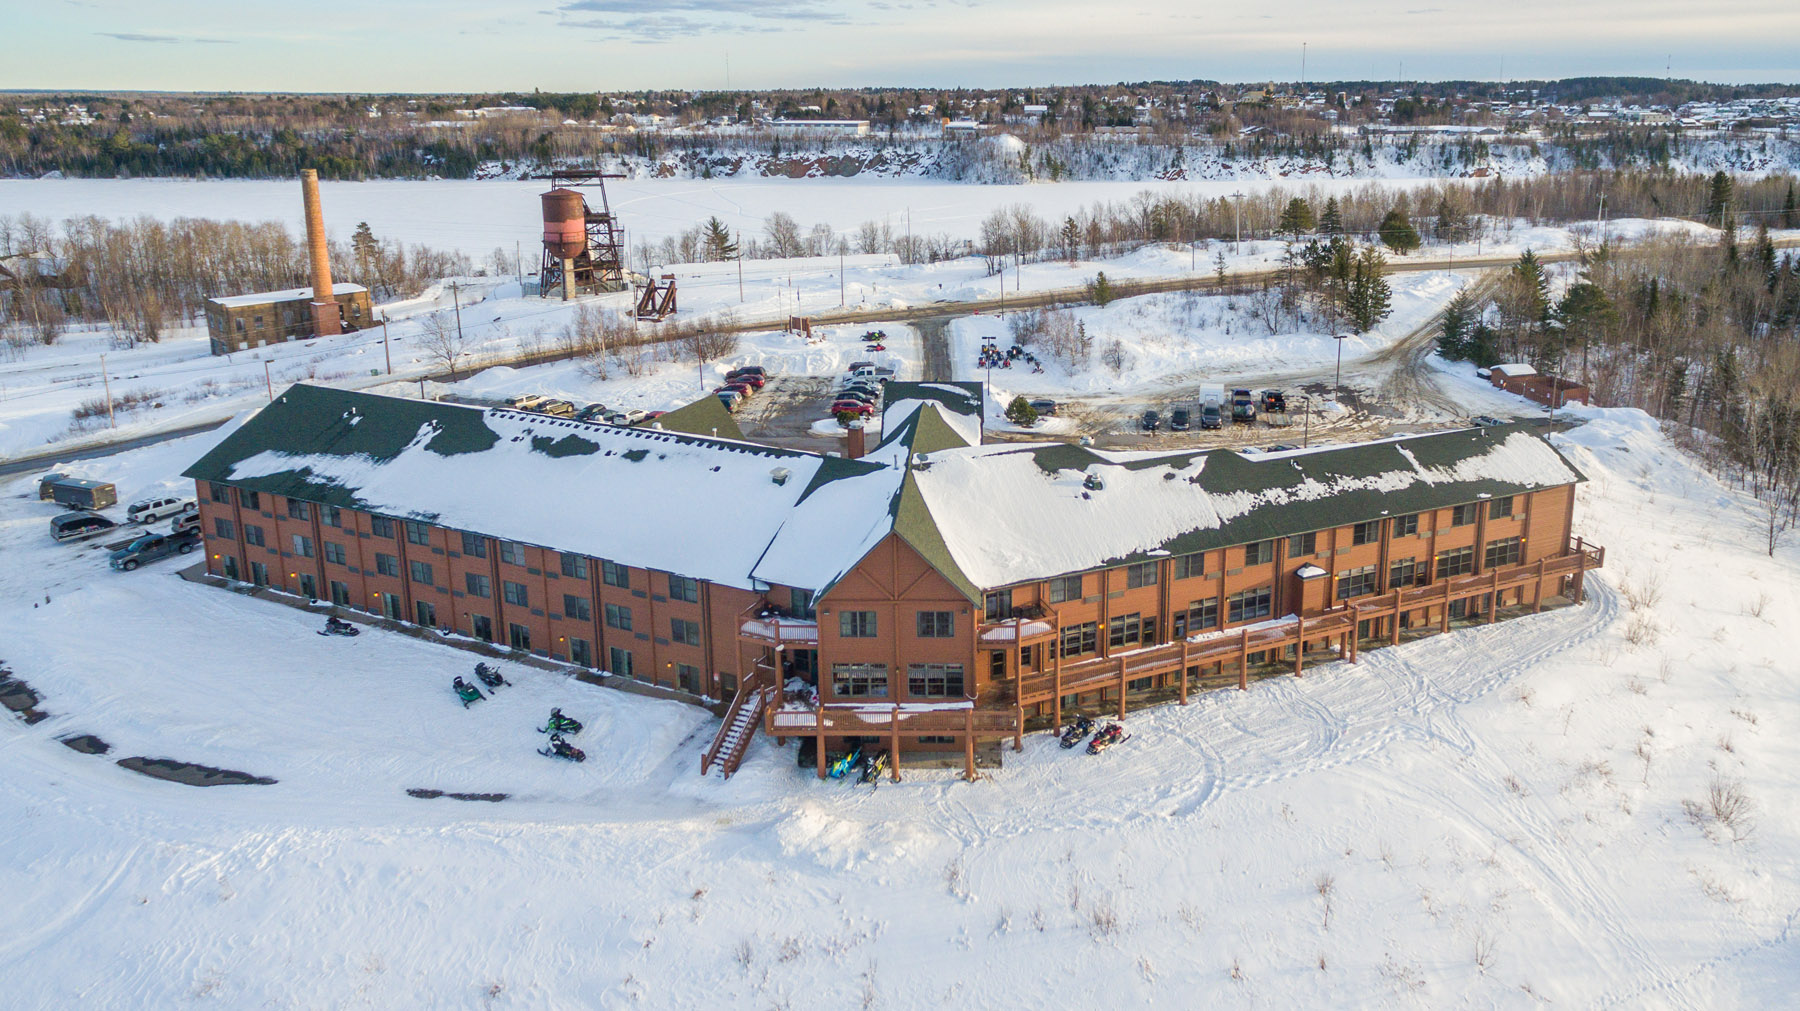 Aerial view of Grand Ely Lodge Resort covered in snow in winter.